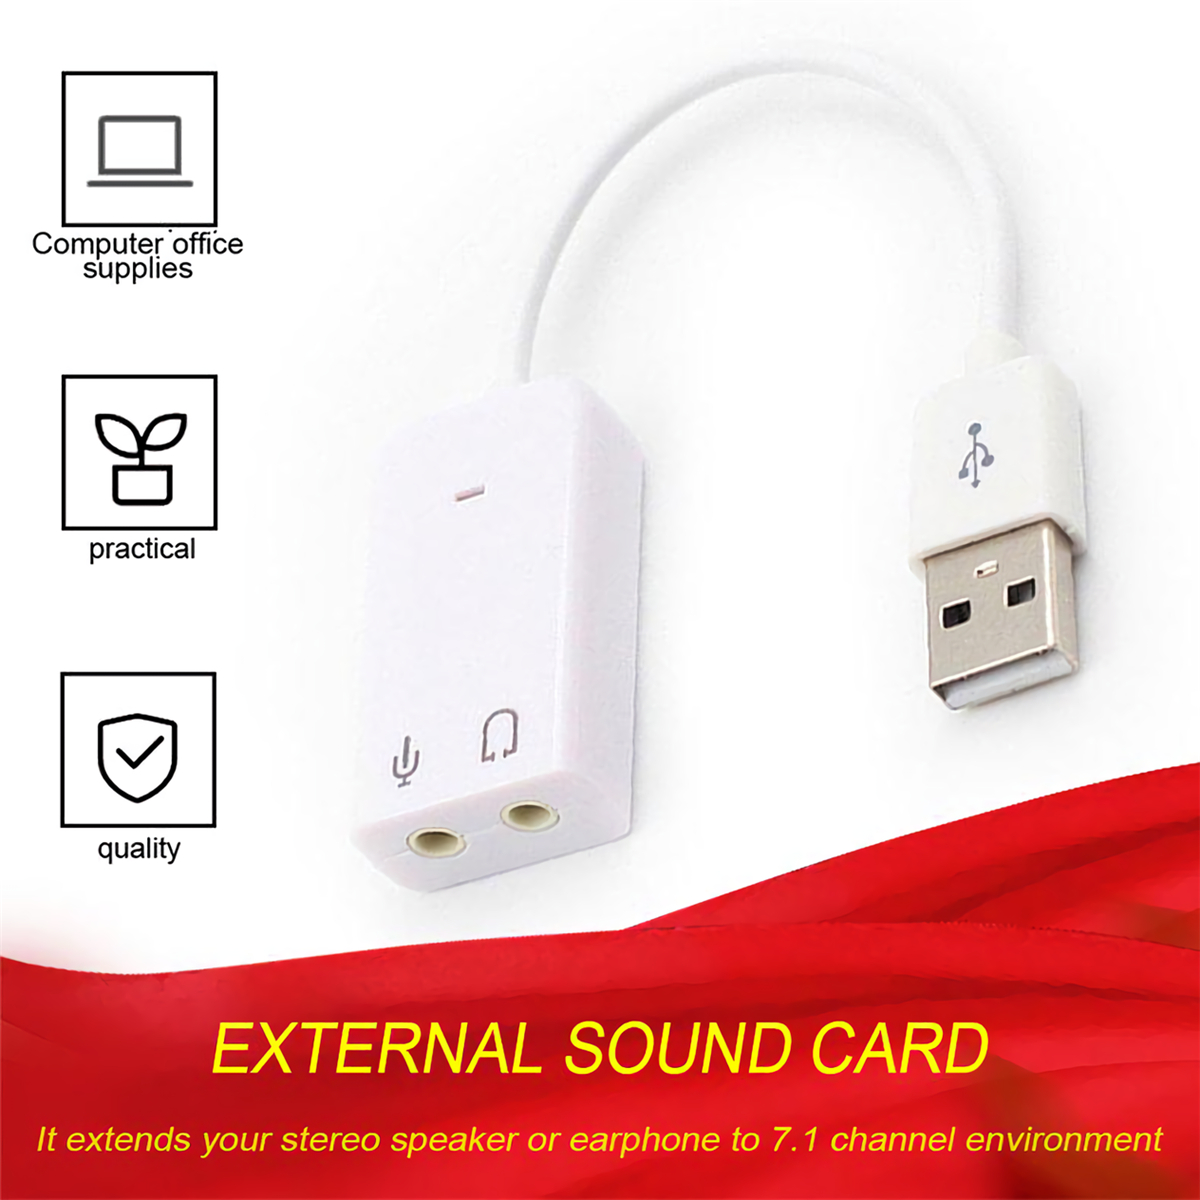 USB-20-External-Sound-Card-20cm-71-Channel-Sound-Card-w35mm-Headphone-and-Microphone-Jack-Interface--1890361-1